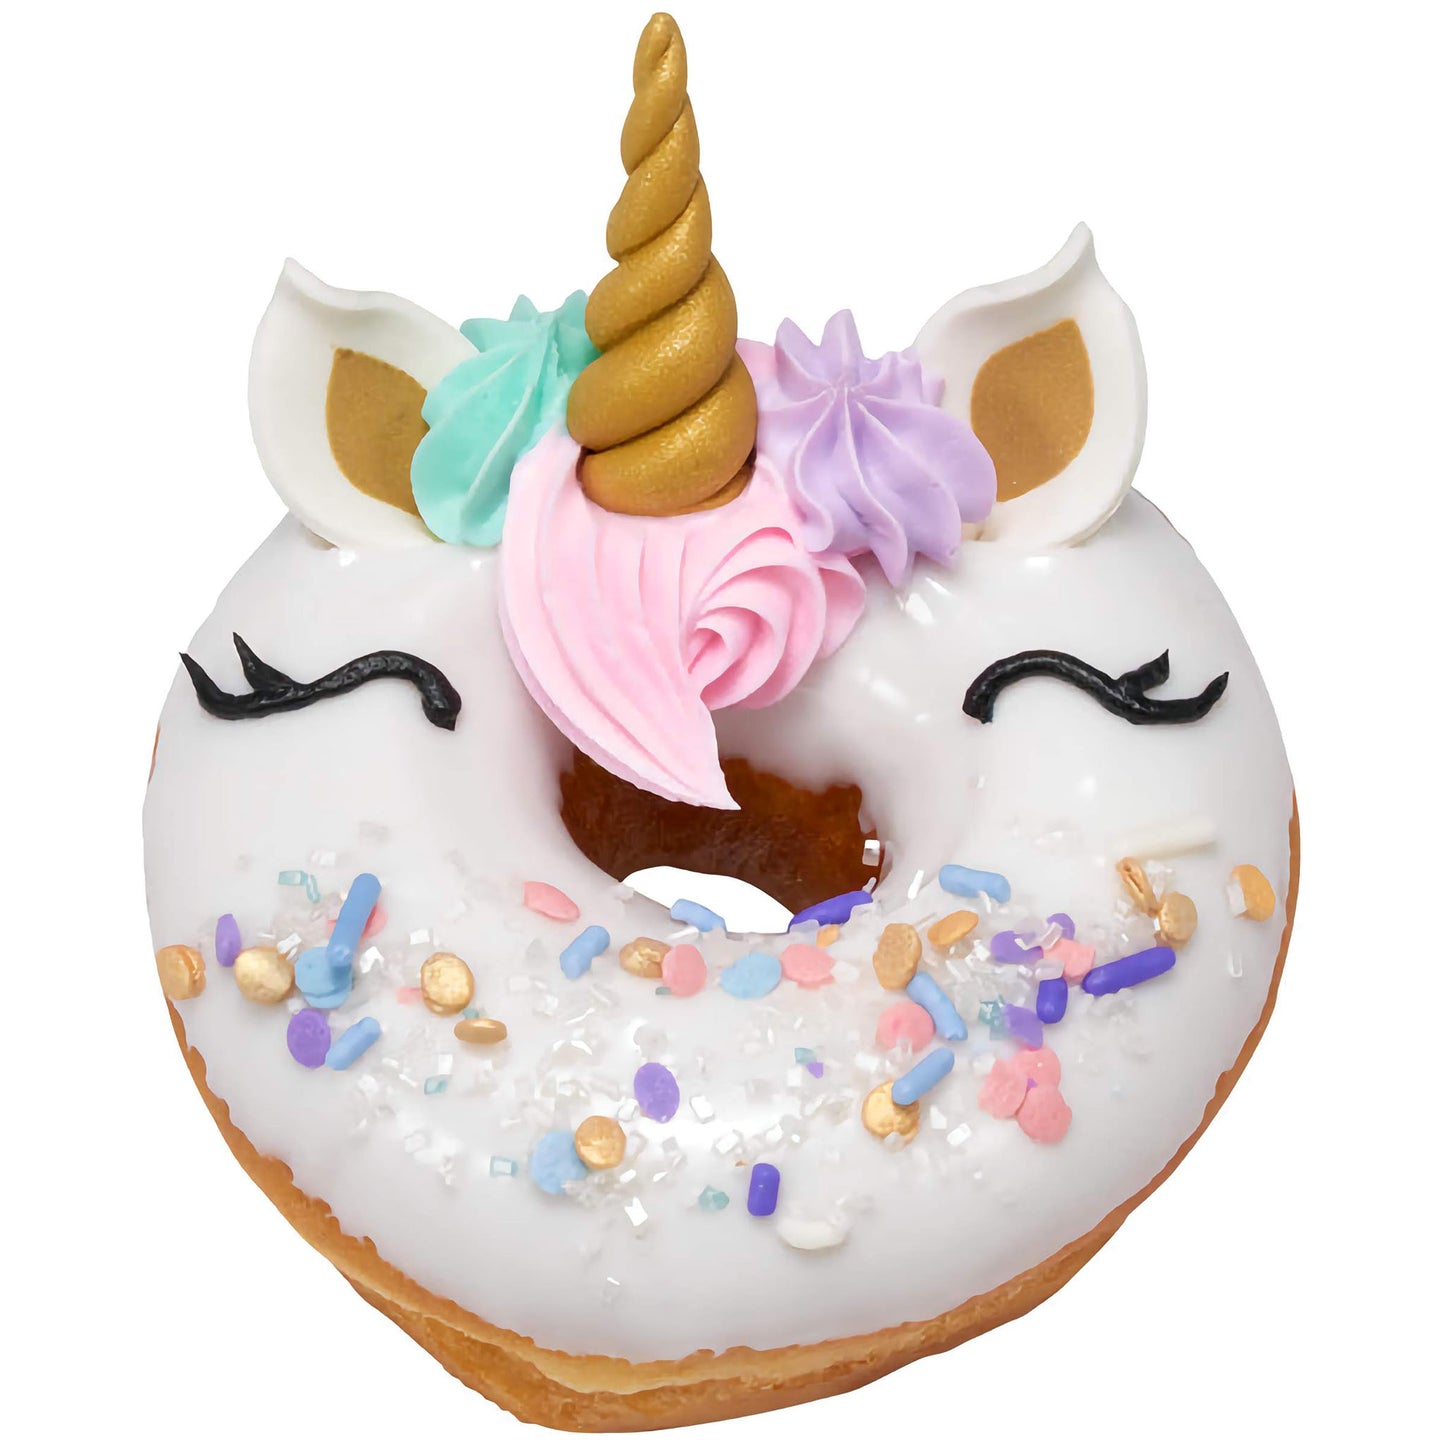 In this use, the sprinkles are part of a larger decoration scheme on a unicorn-themed donut, which includes a white icing base, a pink and blue swirl horn, ear shapes, and a cute drawn-on face. The sprinkles serve as an additional decorative element that complements the whimsical theme of the donut.